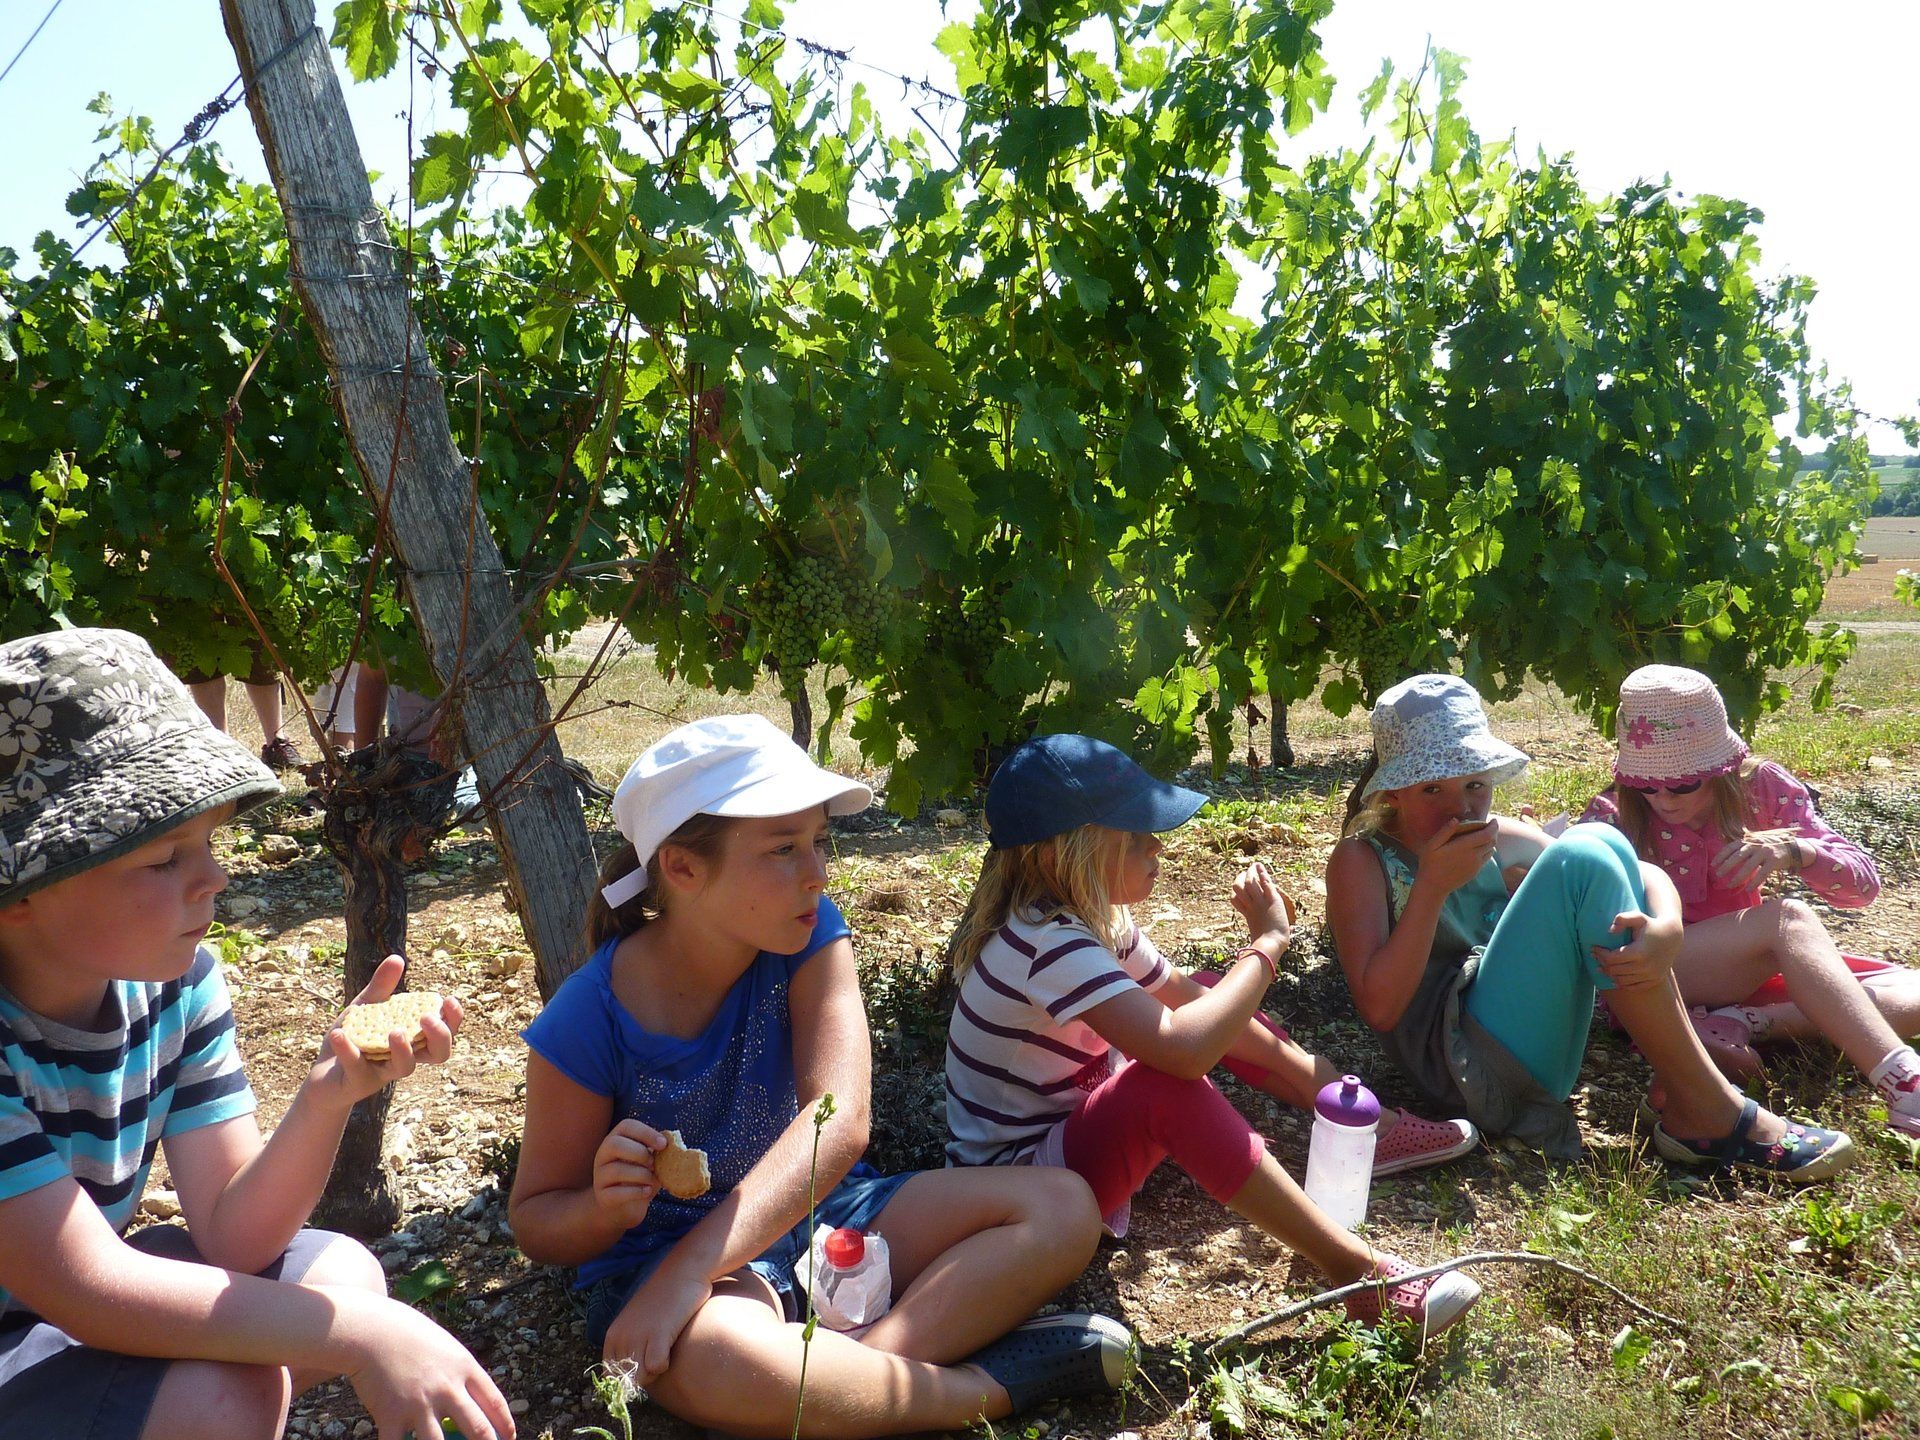 children sat in the shade of grape vines on a hot day